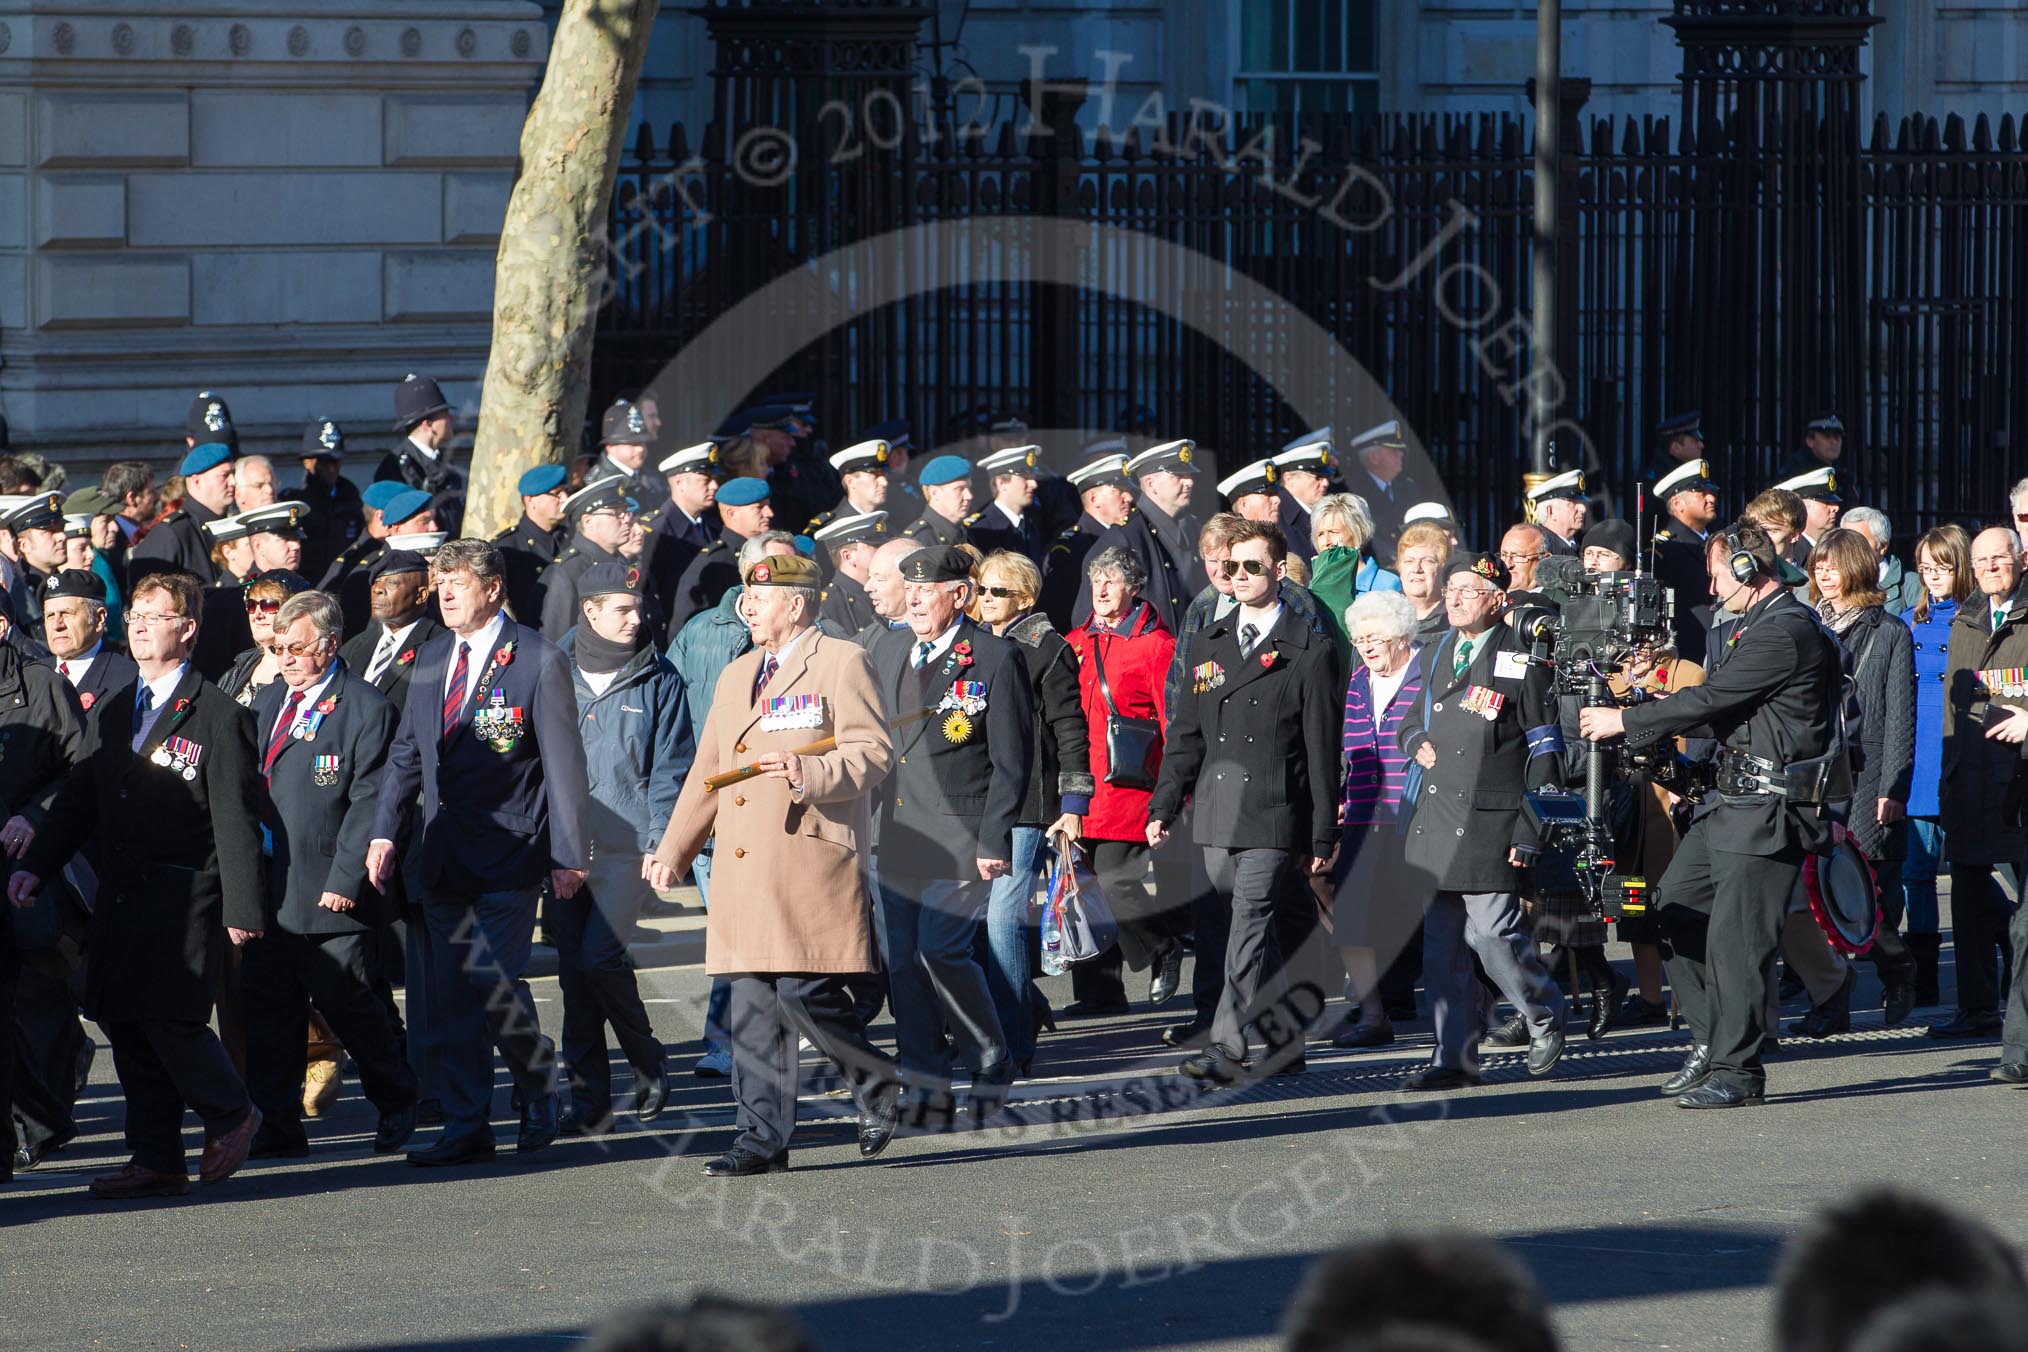 Remembrance Sunday 2012 Cenotaph March Past: Group F2 - Aden Veterans Association and F3 - 1st Army Association..
Whitehall, Cenotaph,
London SW1,

United Kingdom,
on 11 November 2012 at 11:45, image #396